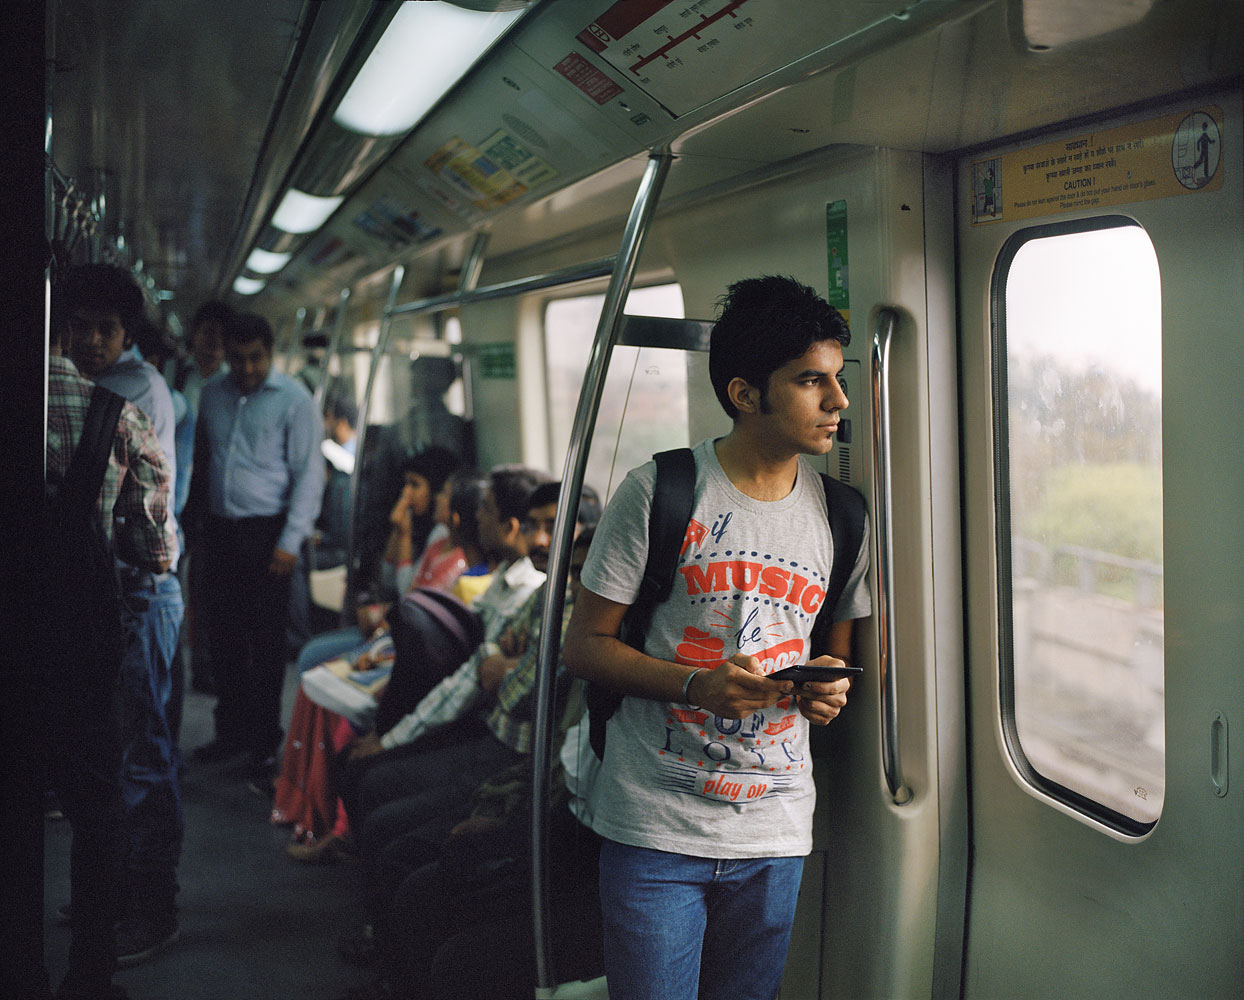 Mayank Jain, 20, a final year student of business studies at Delhi University. He loves reading literature and poetry and carries his Kindle on the New Delhi Metro ride to college. Mayank has been working as a trainee editor at Youth Ki Awaaz for the past 7 months. He has decided to vote for a candidate and not a party.